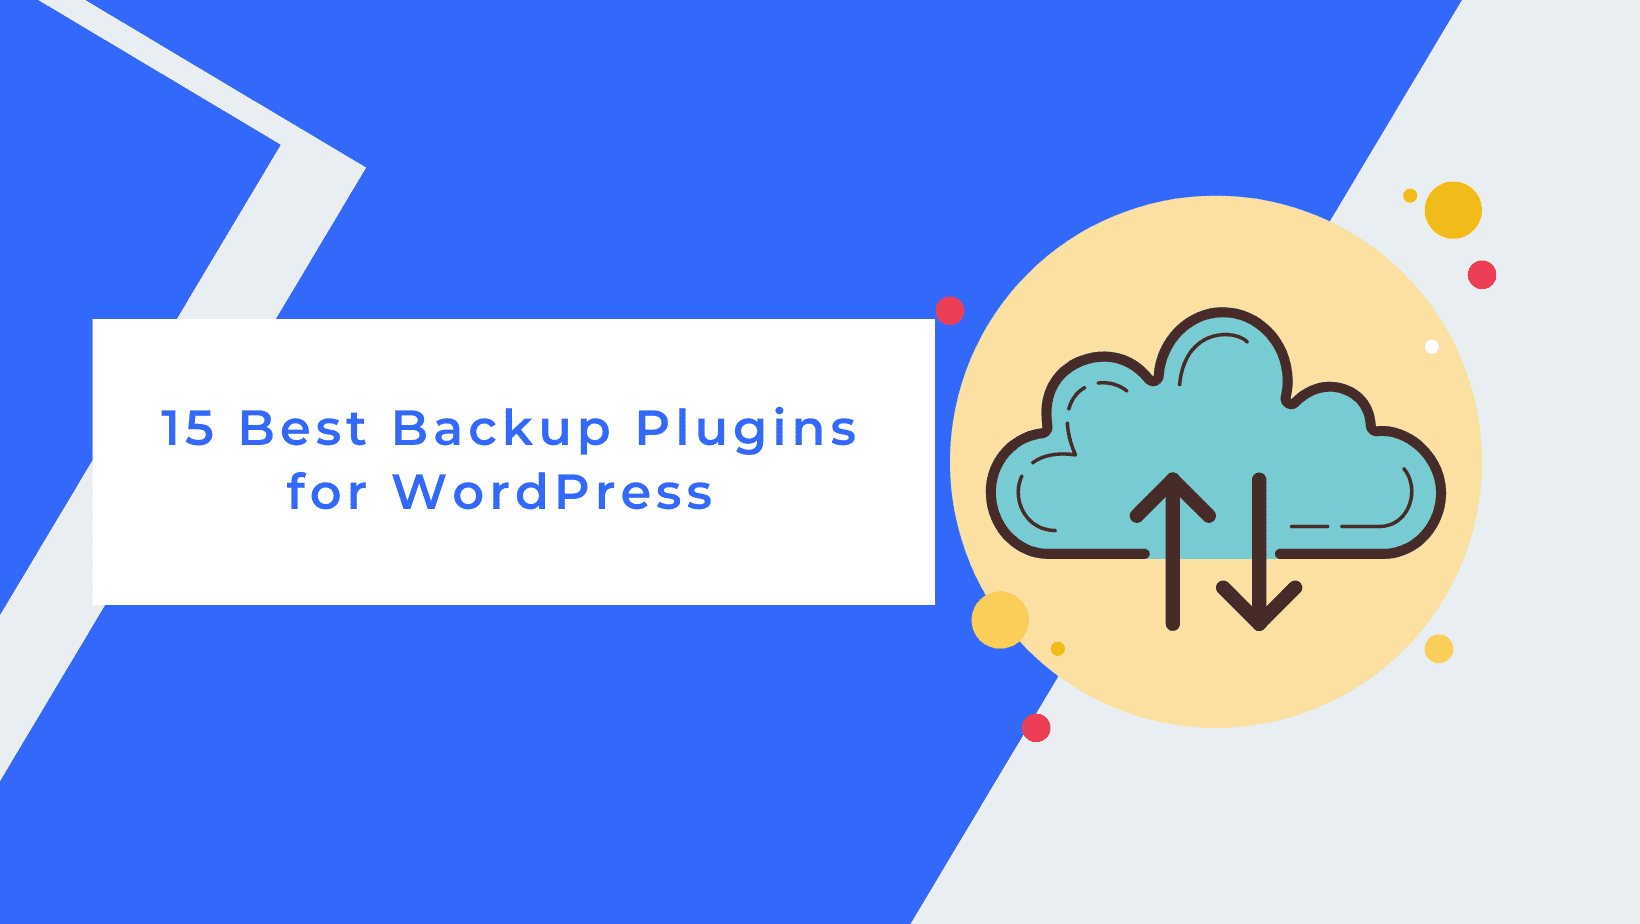 Title with cloud backup logo as a featured image for the 15 best backup plugins for WordPress